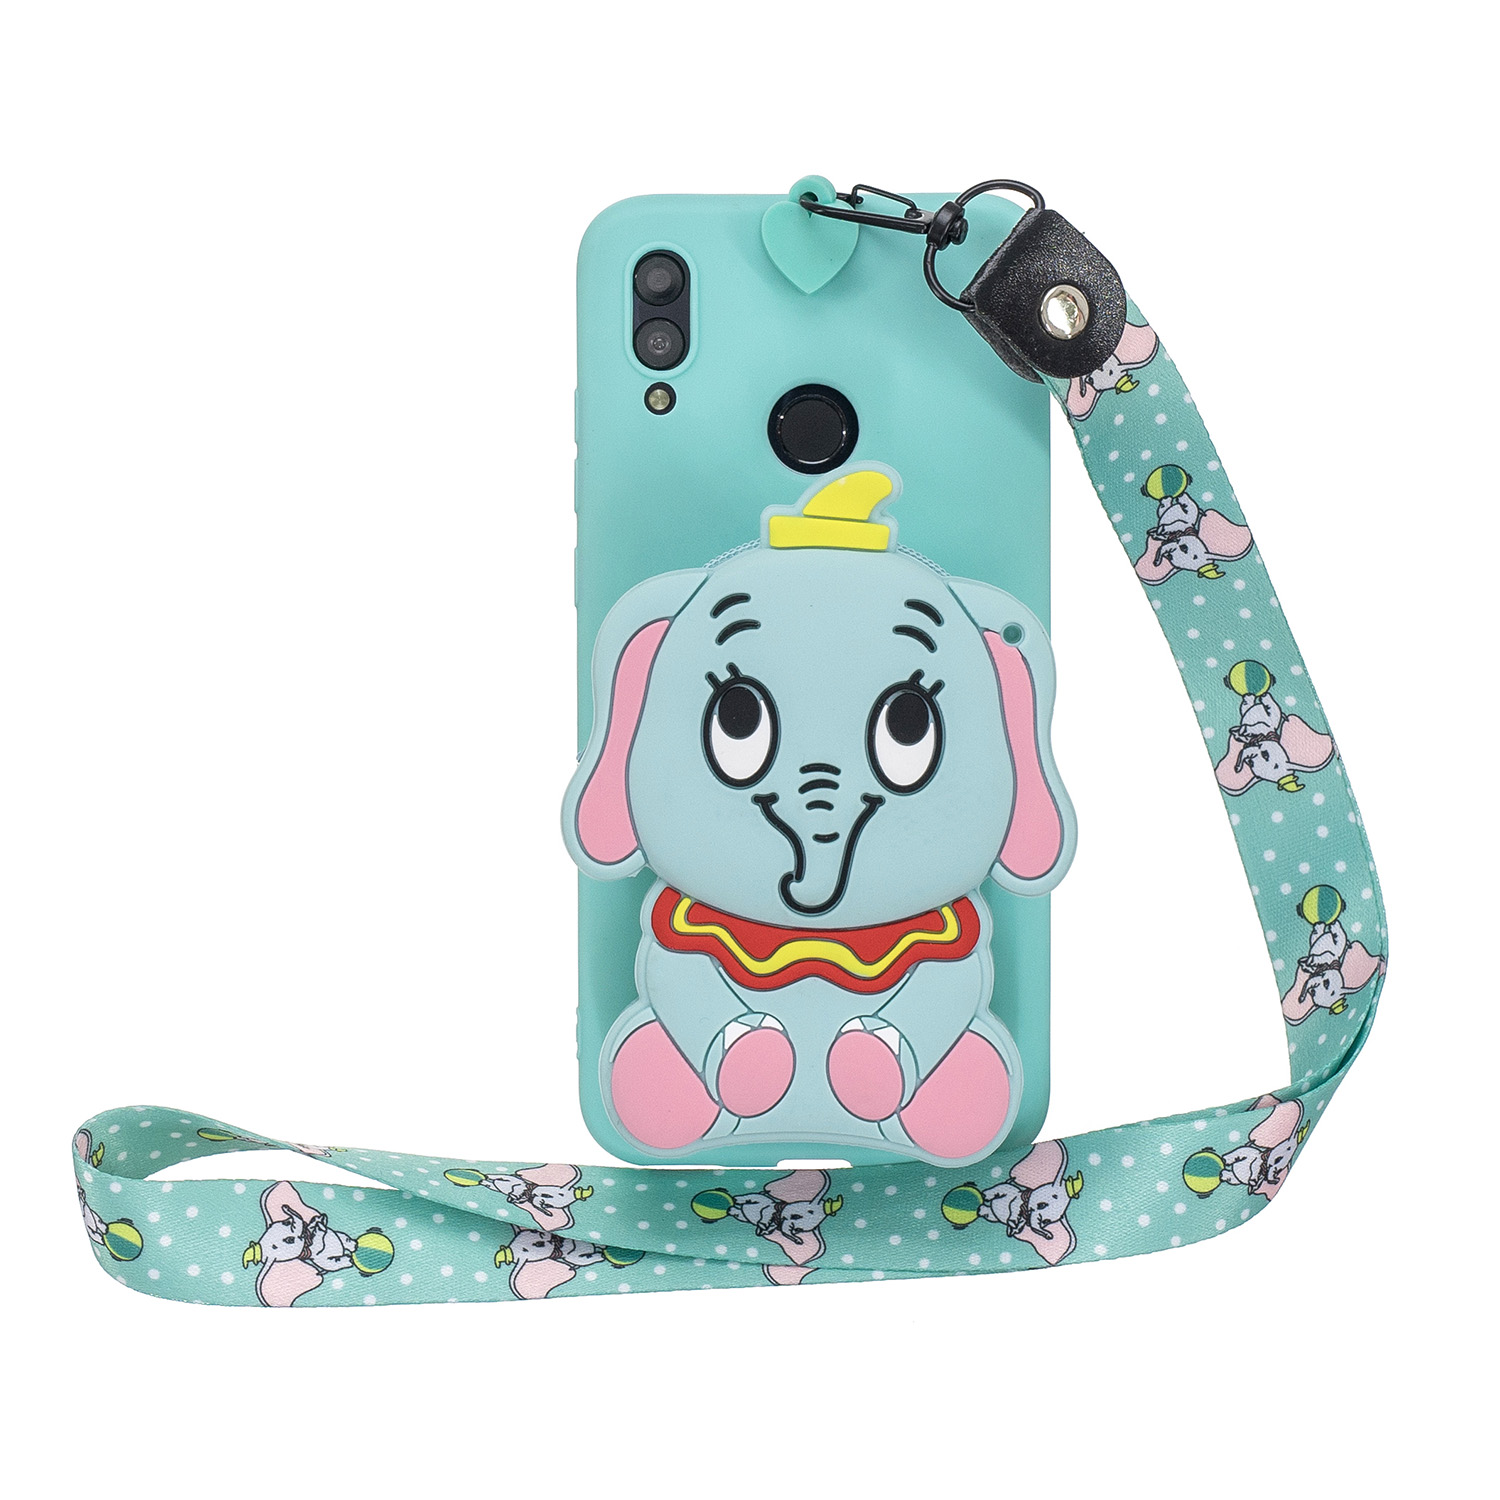 For HUAWEI Y6 2019 Y7 2019 Y9 2019 Cartoon Full Protective TPU Mobile Phone Cover with Mini Coin Purse+Cartoon Hanging Lanyard 2 light blue elephant